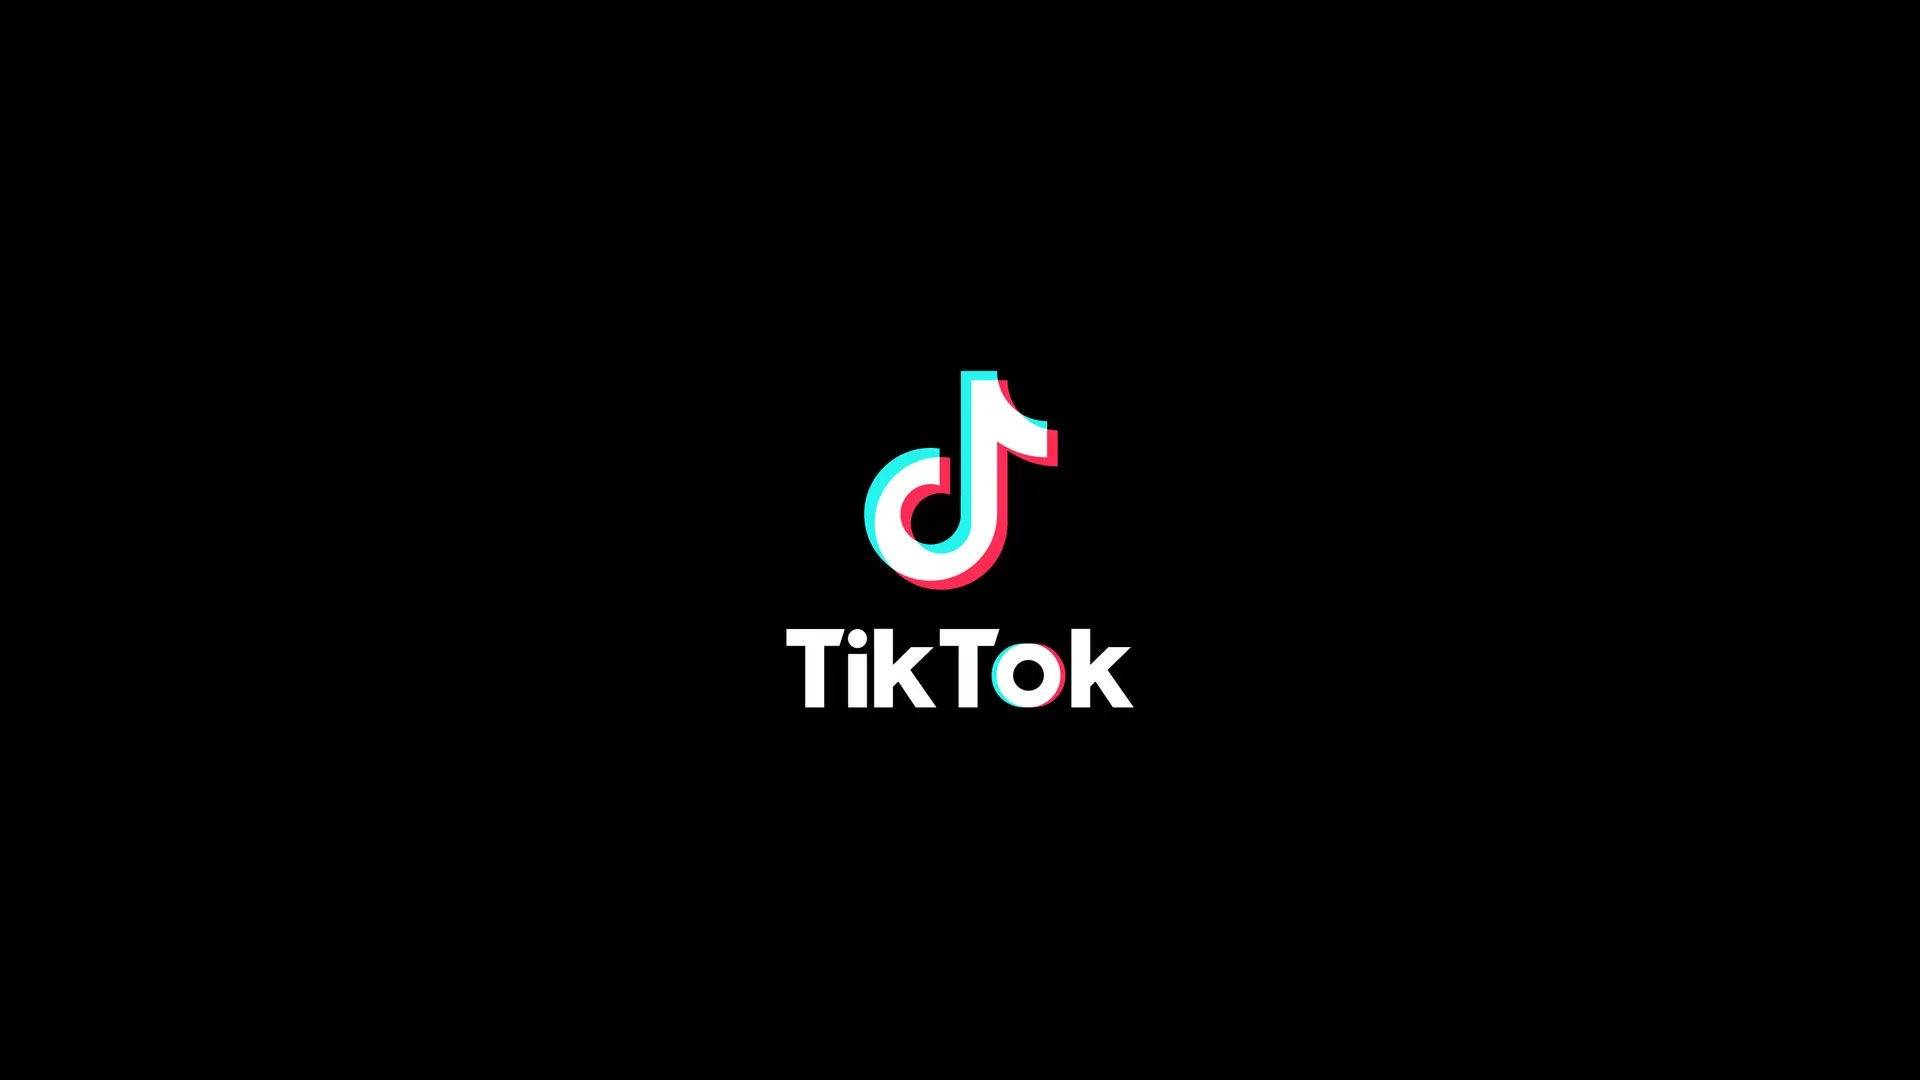 How to Post a Tiktok Video to Twitter